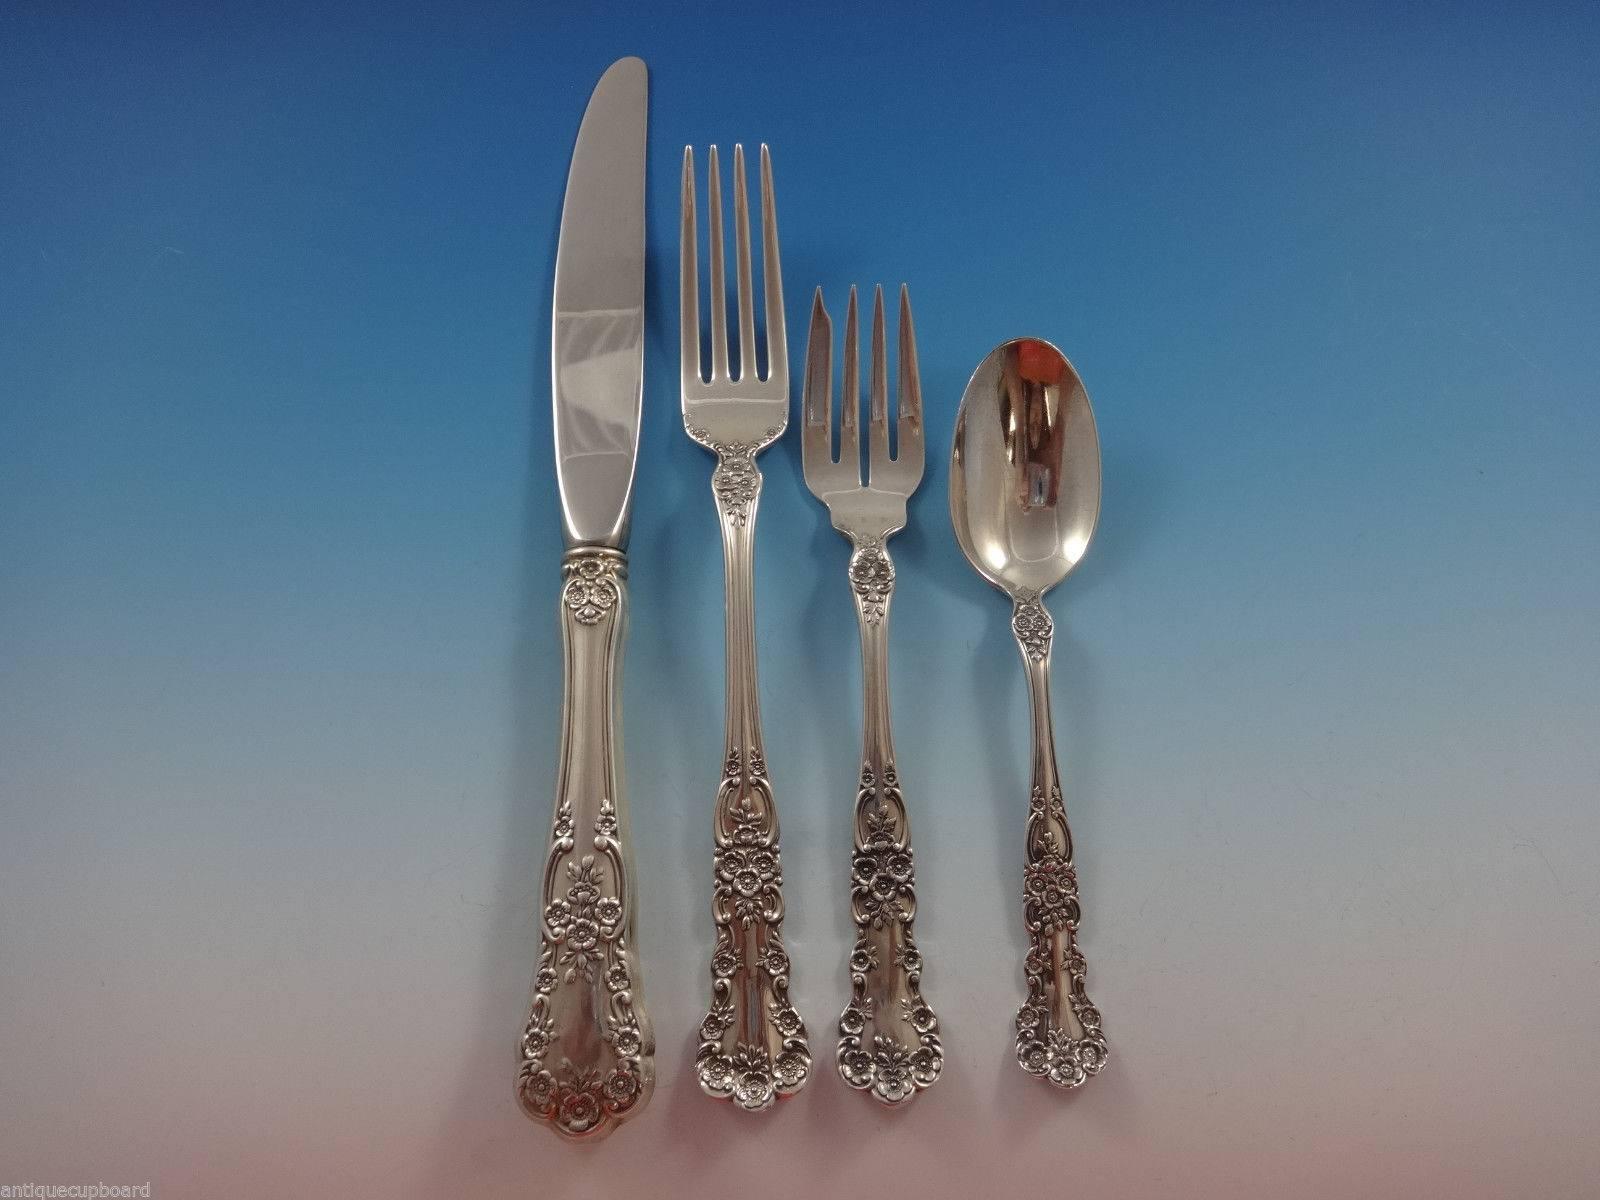 Buttercup by Gorham sterling silver place size flatware set, 32 pieces. This set includes:

Eight place size knives, 9 1/4